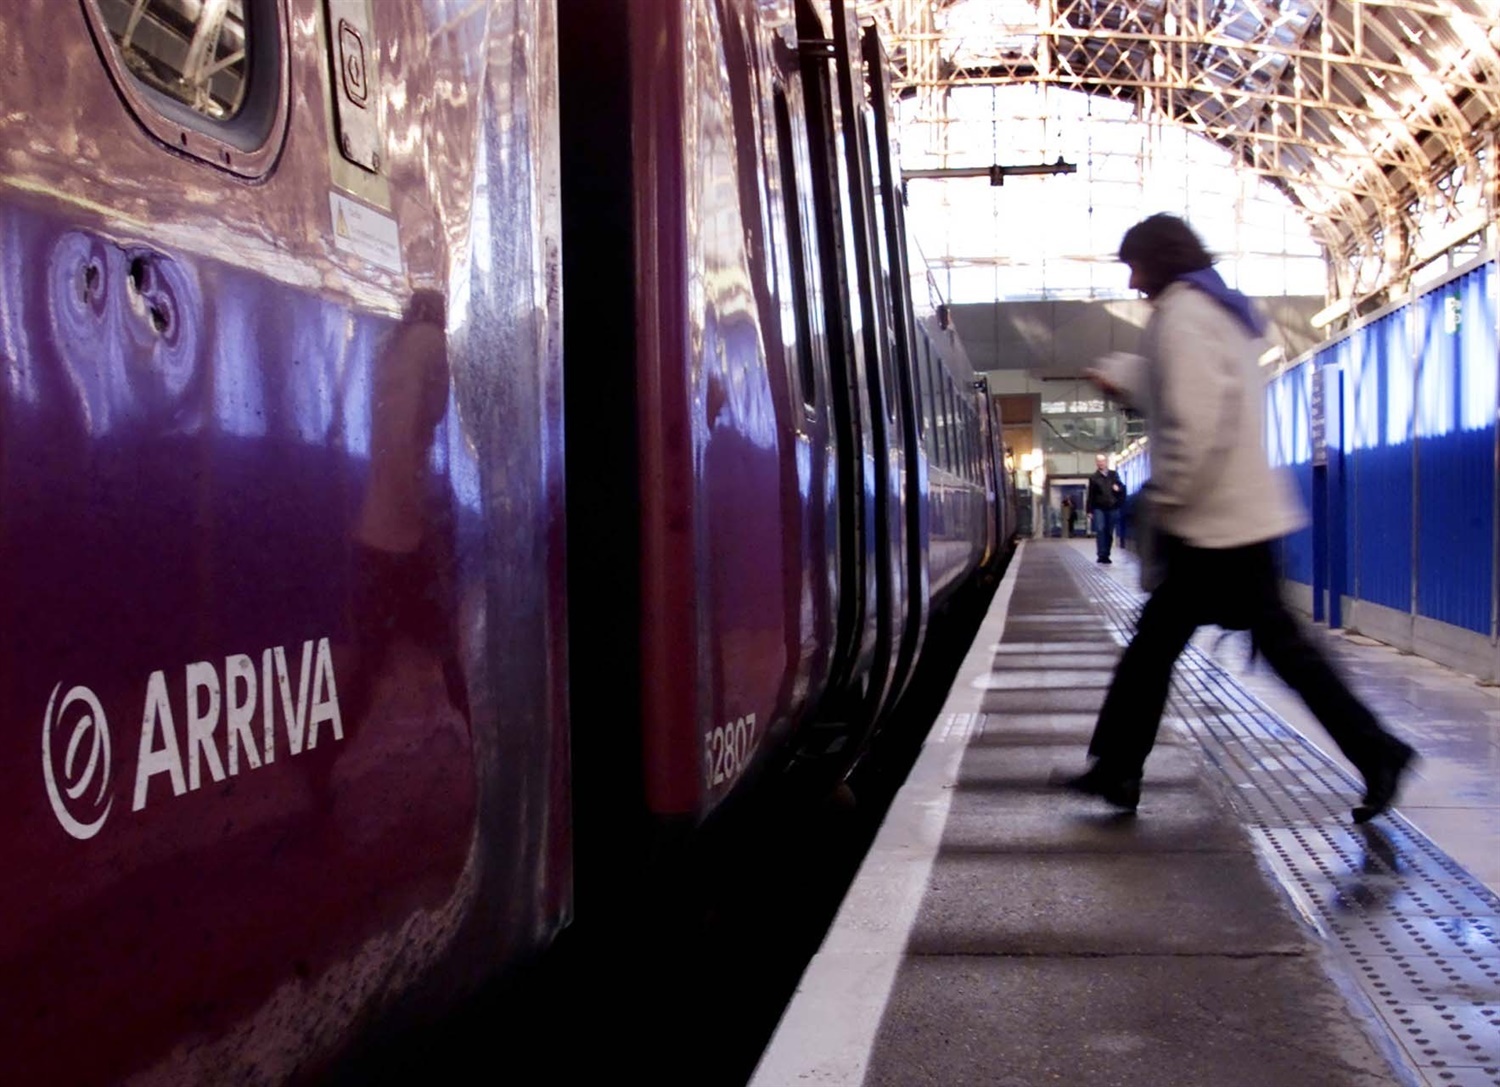 Arriva’s Northern takeover could lead to some ‘significantly’ higher fares, CMA finds